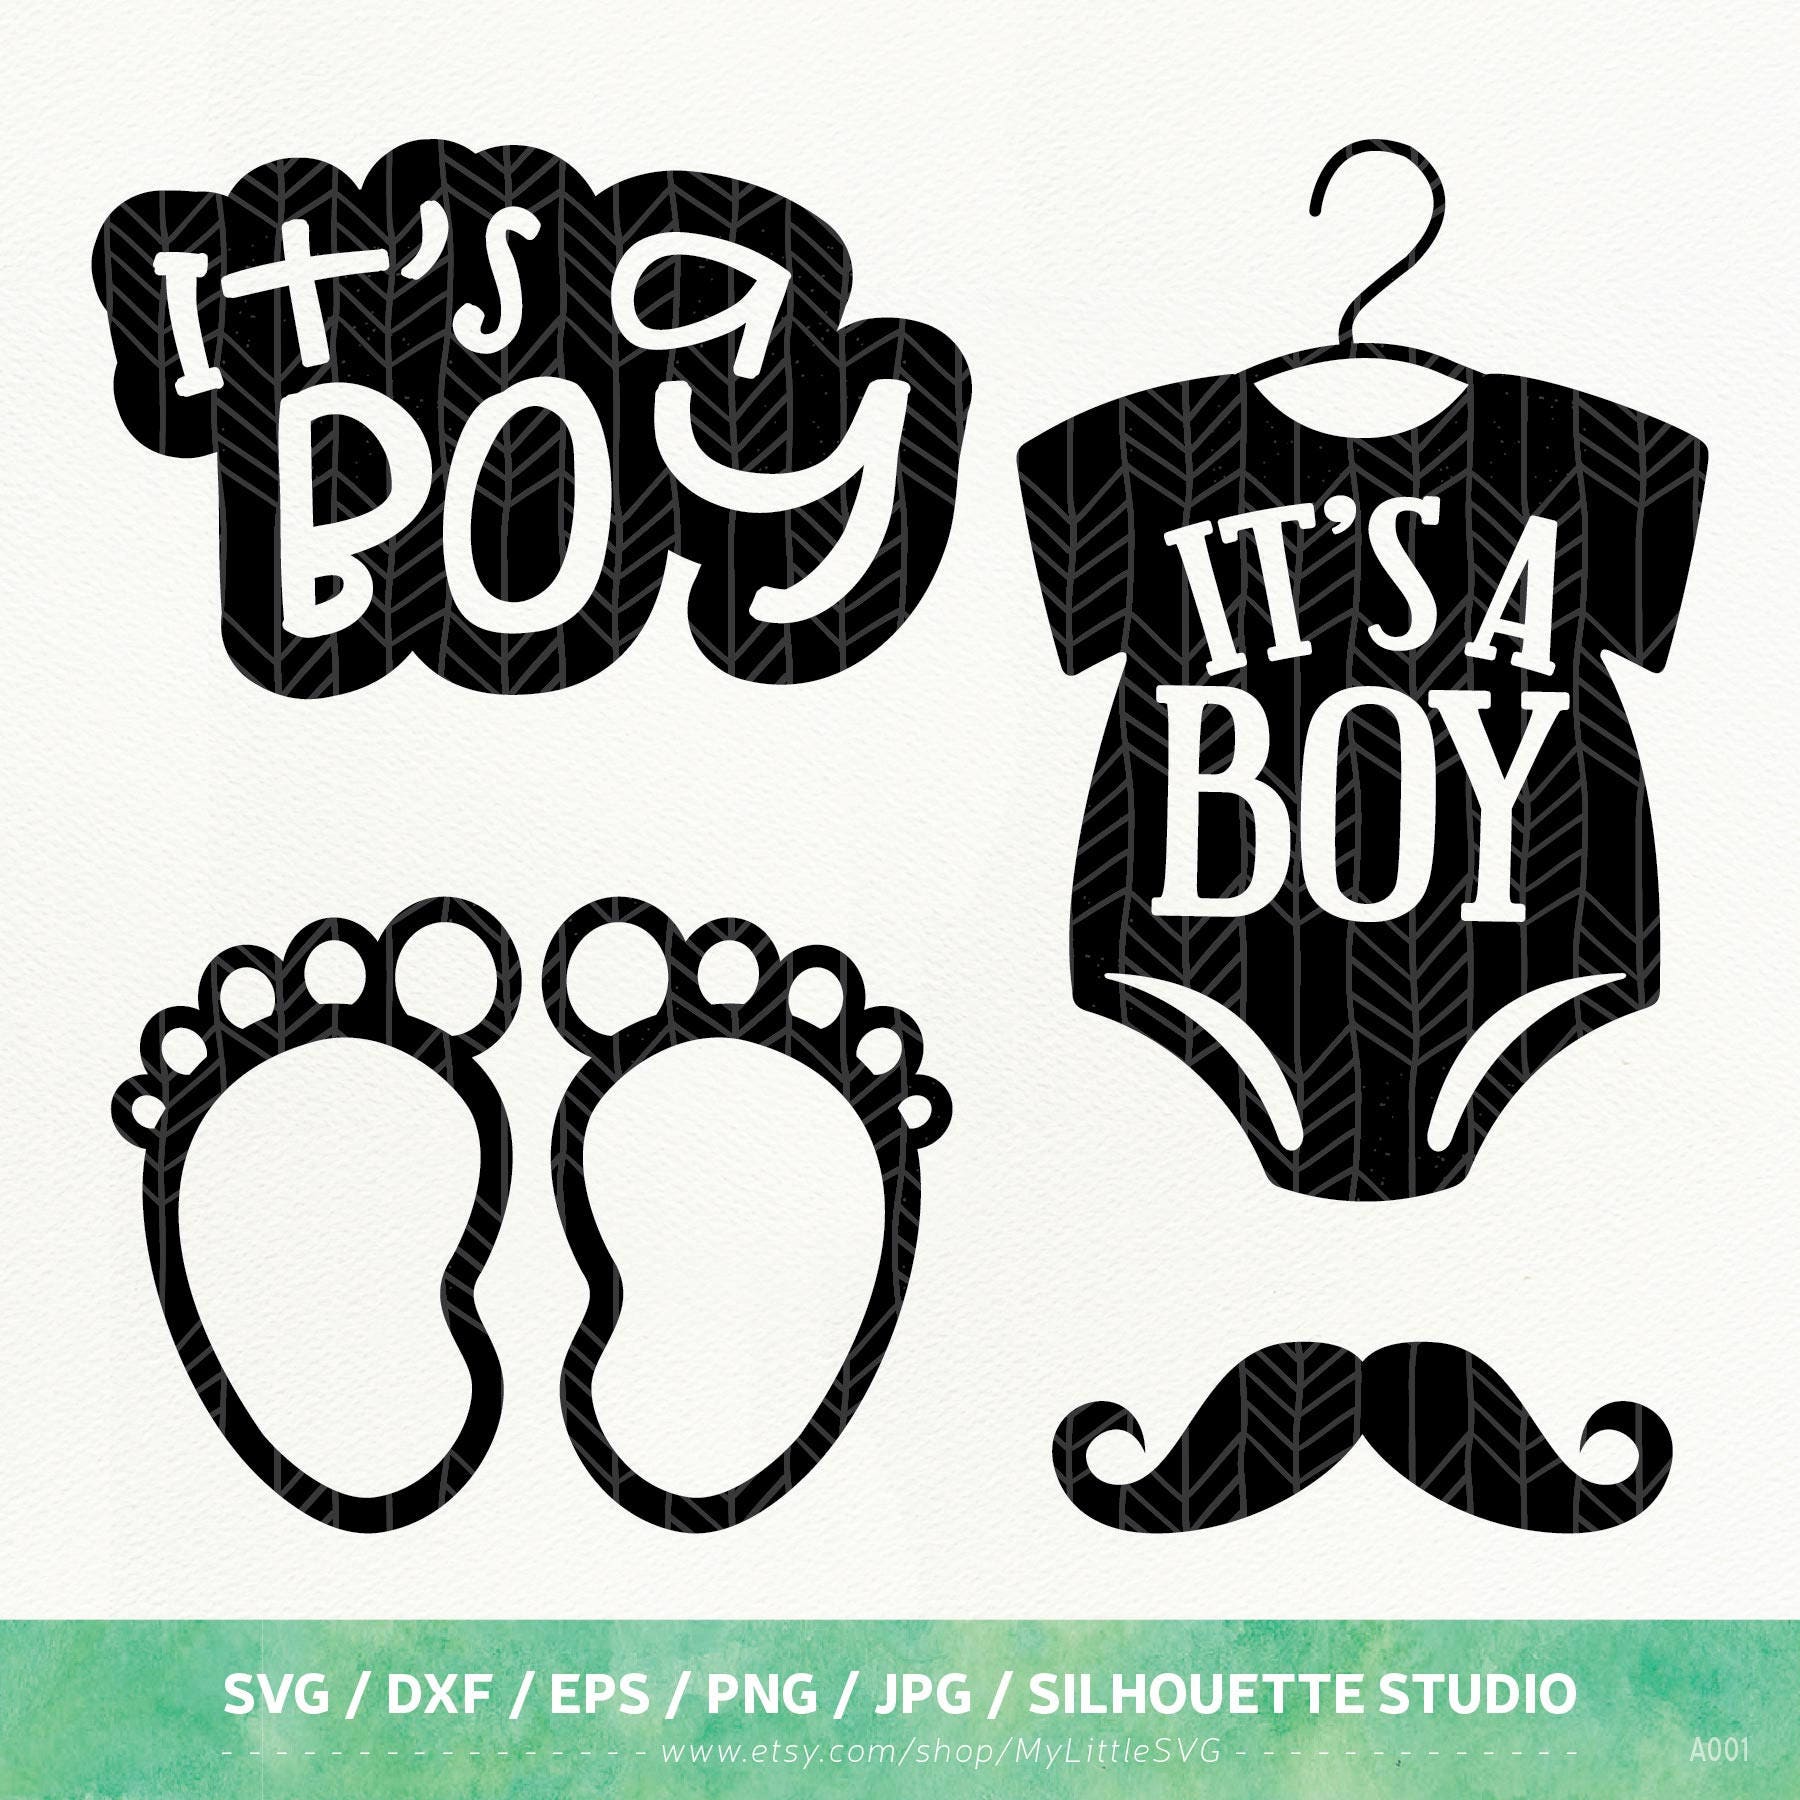 Download It's A Boy SVG Files, Baby Boy dxf, png, eps, Silhouette Studio, Cutting File from MyLittleSVG ...